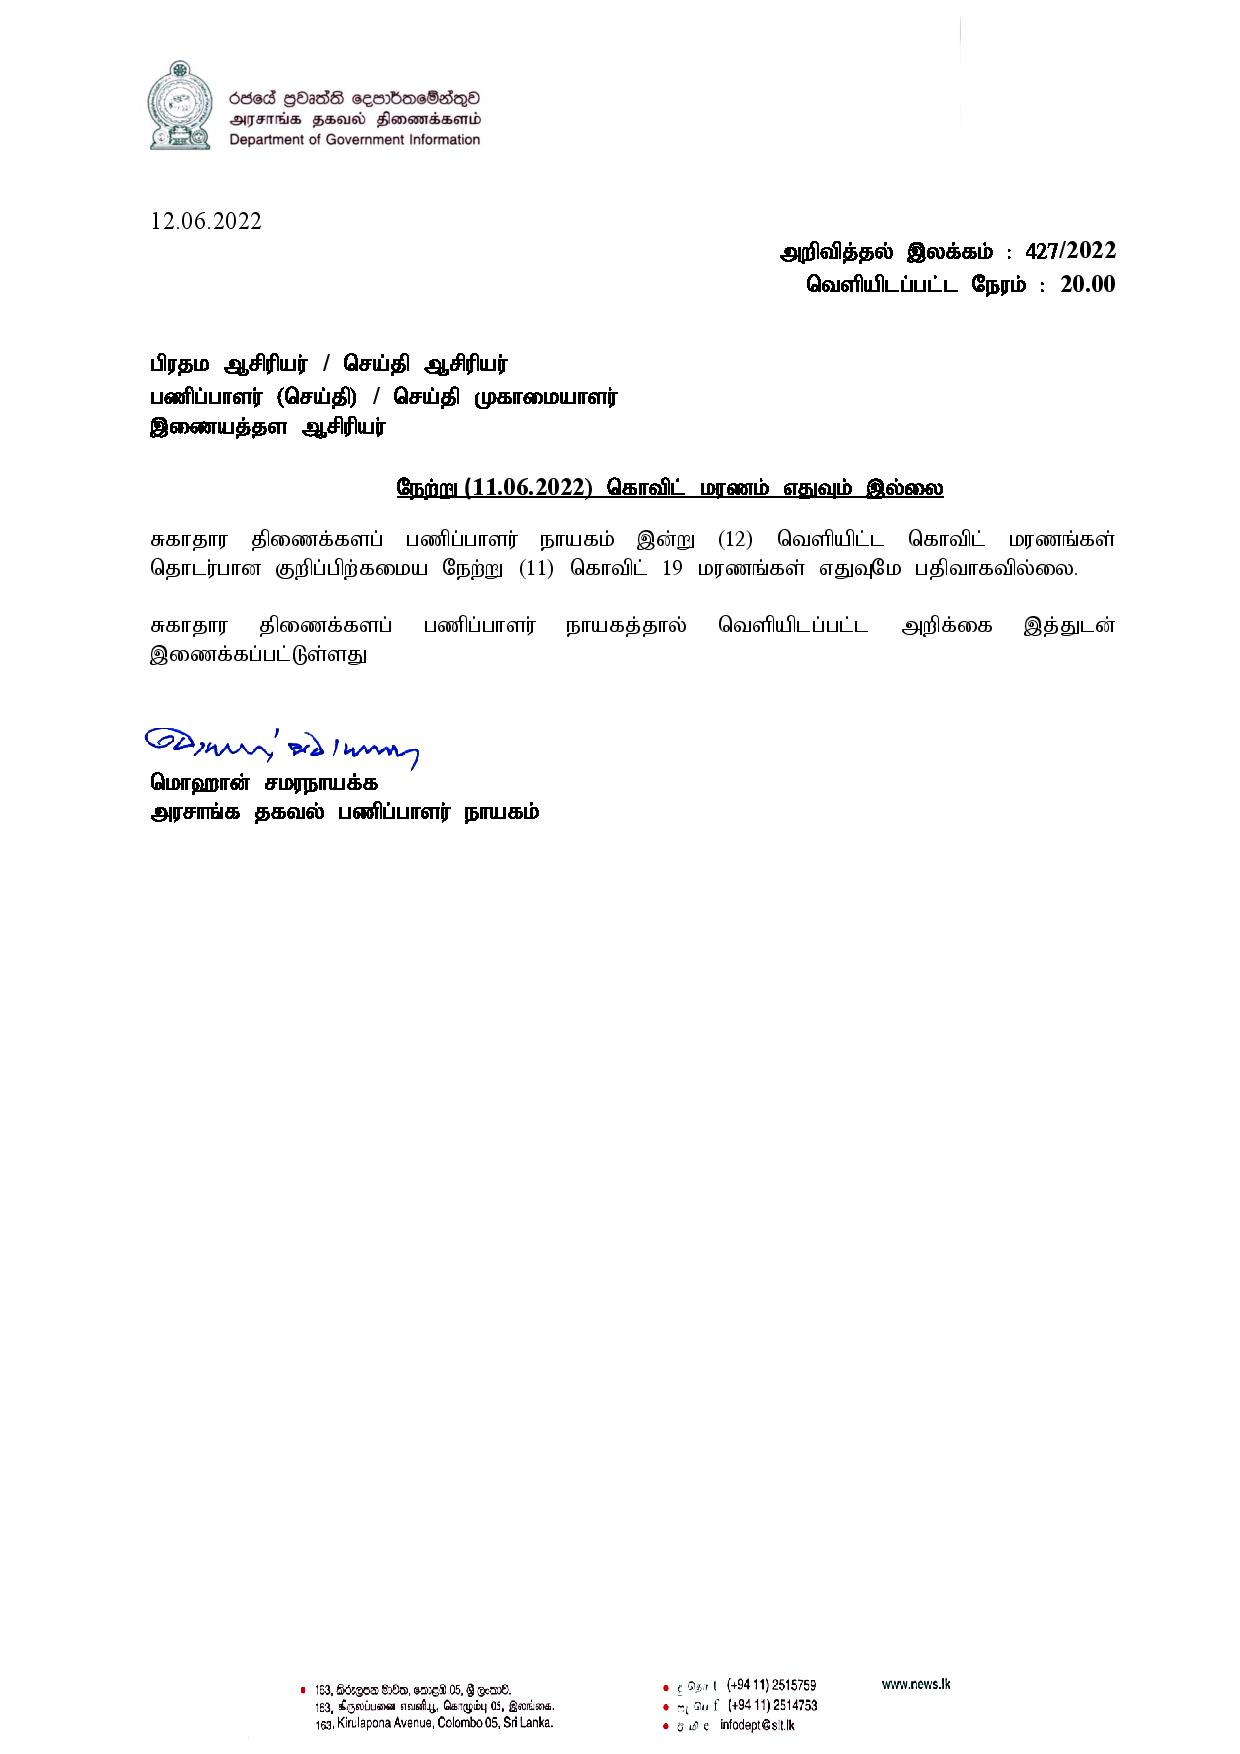 Release No 427 Tamil page 001